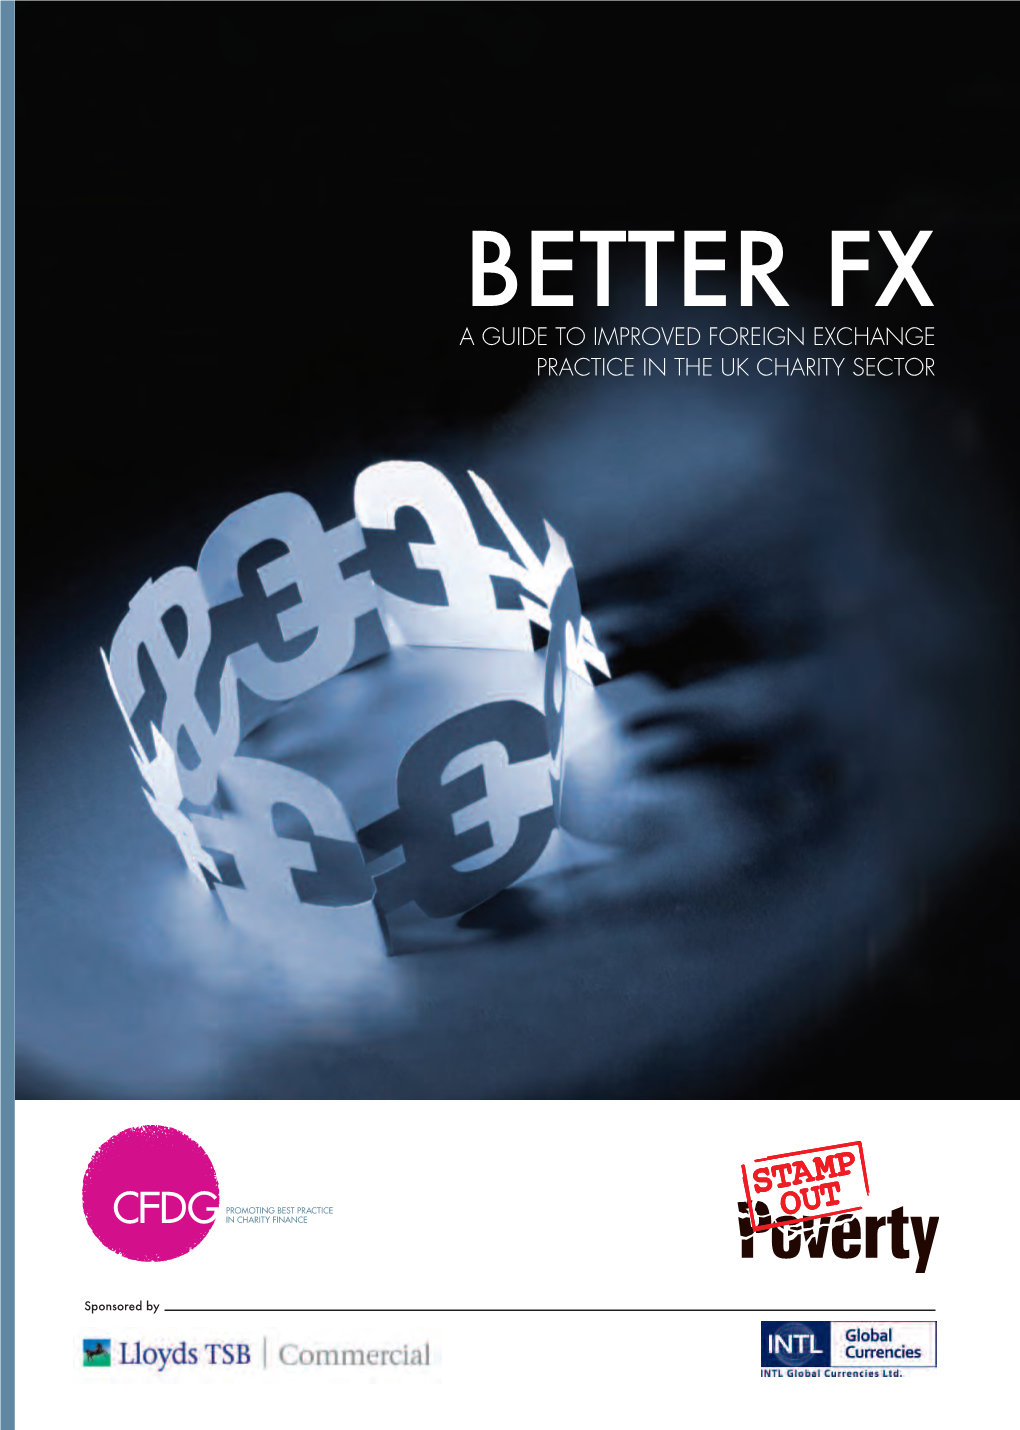 Better FX a GUIDE to IMPROVED FOREIGN EXCHANGE PRACTICE in the UK CHARITY SECTOR